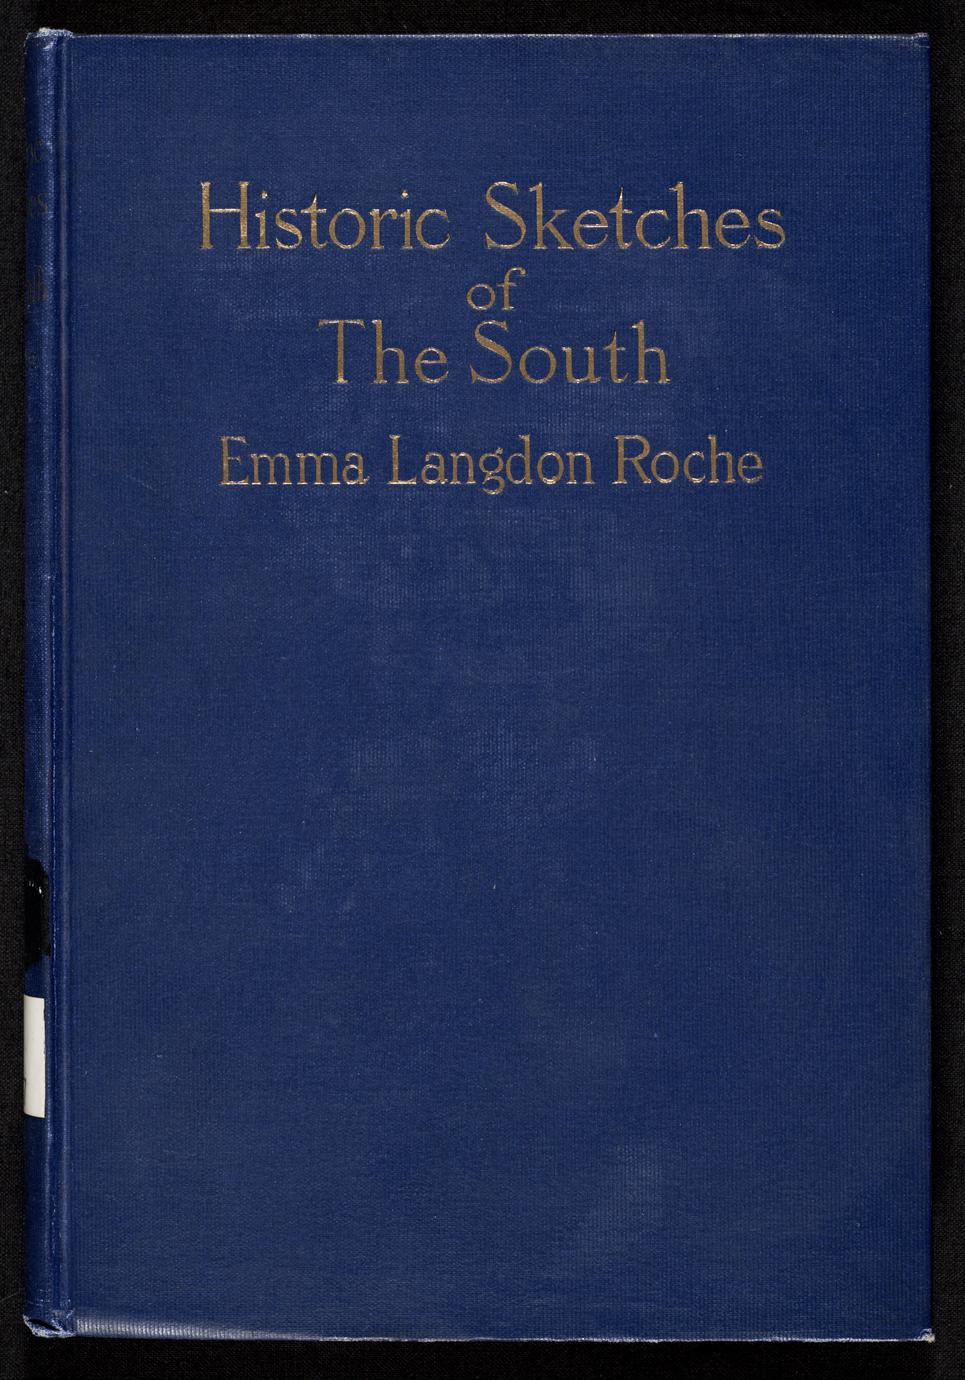 Historic sketches of the South (1 of 2)